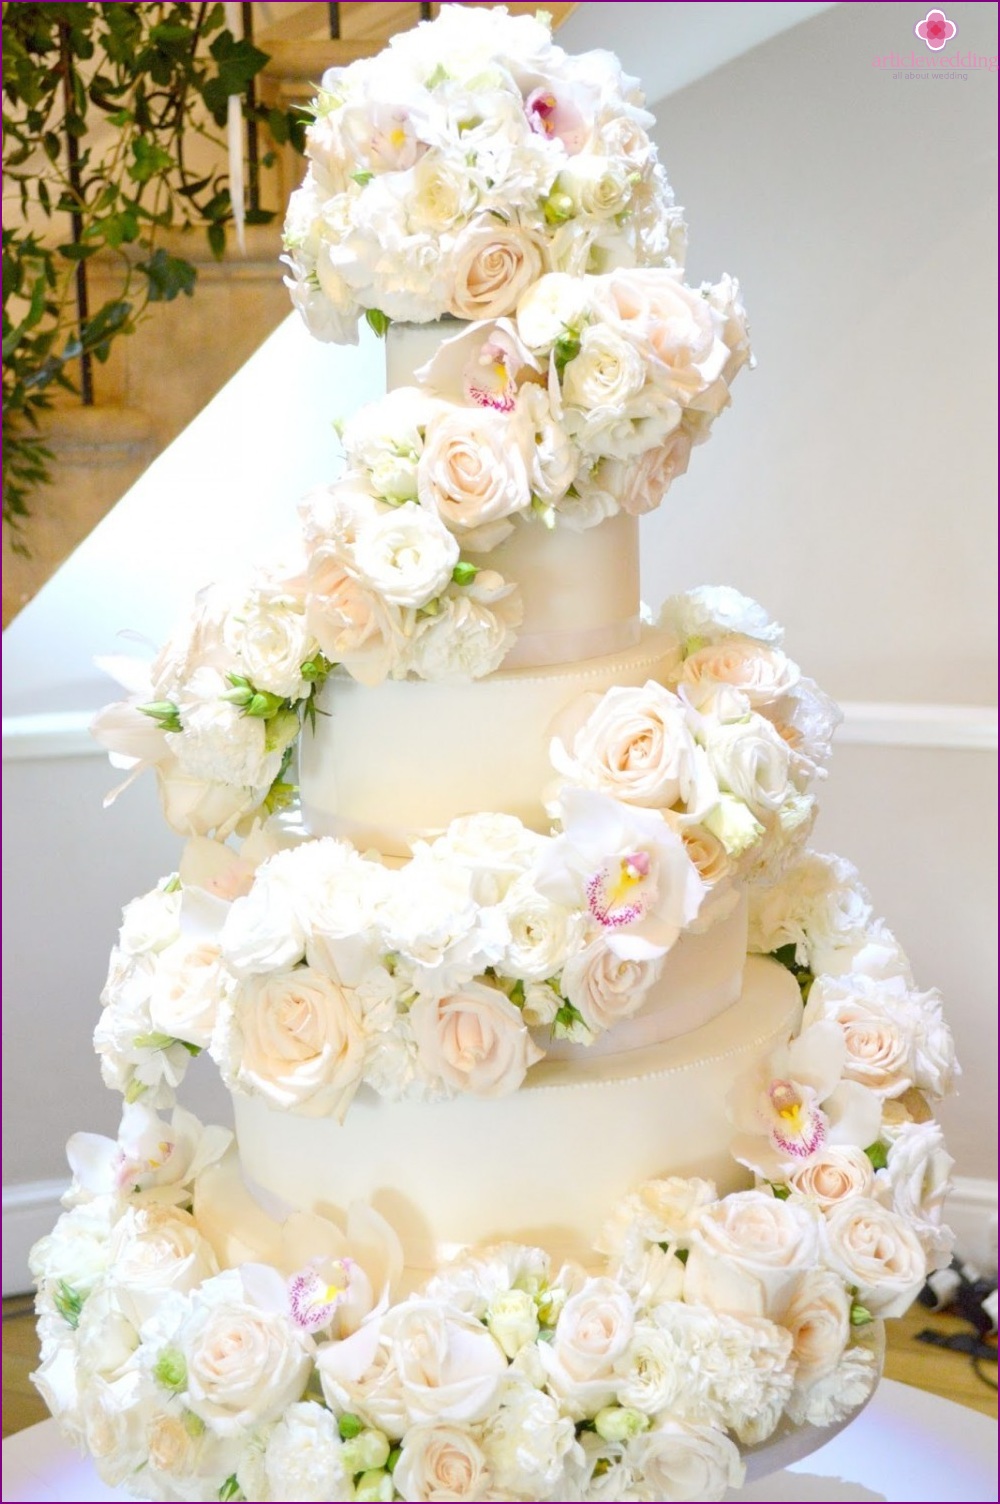 Cake with rich floral decorations